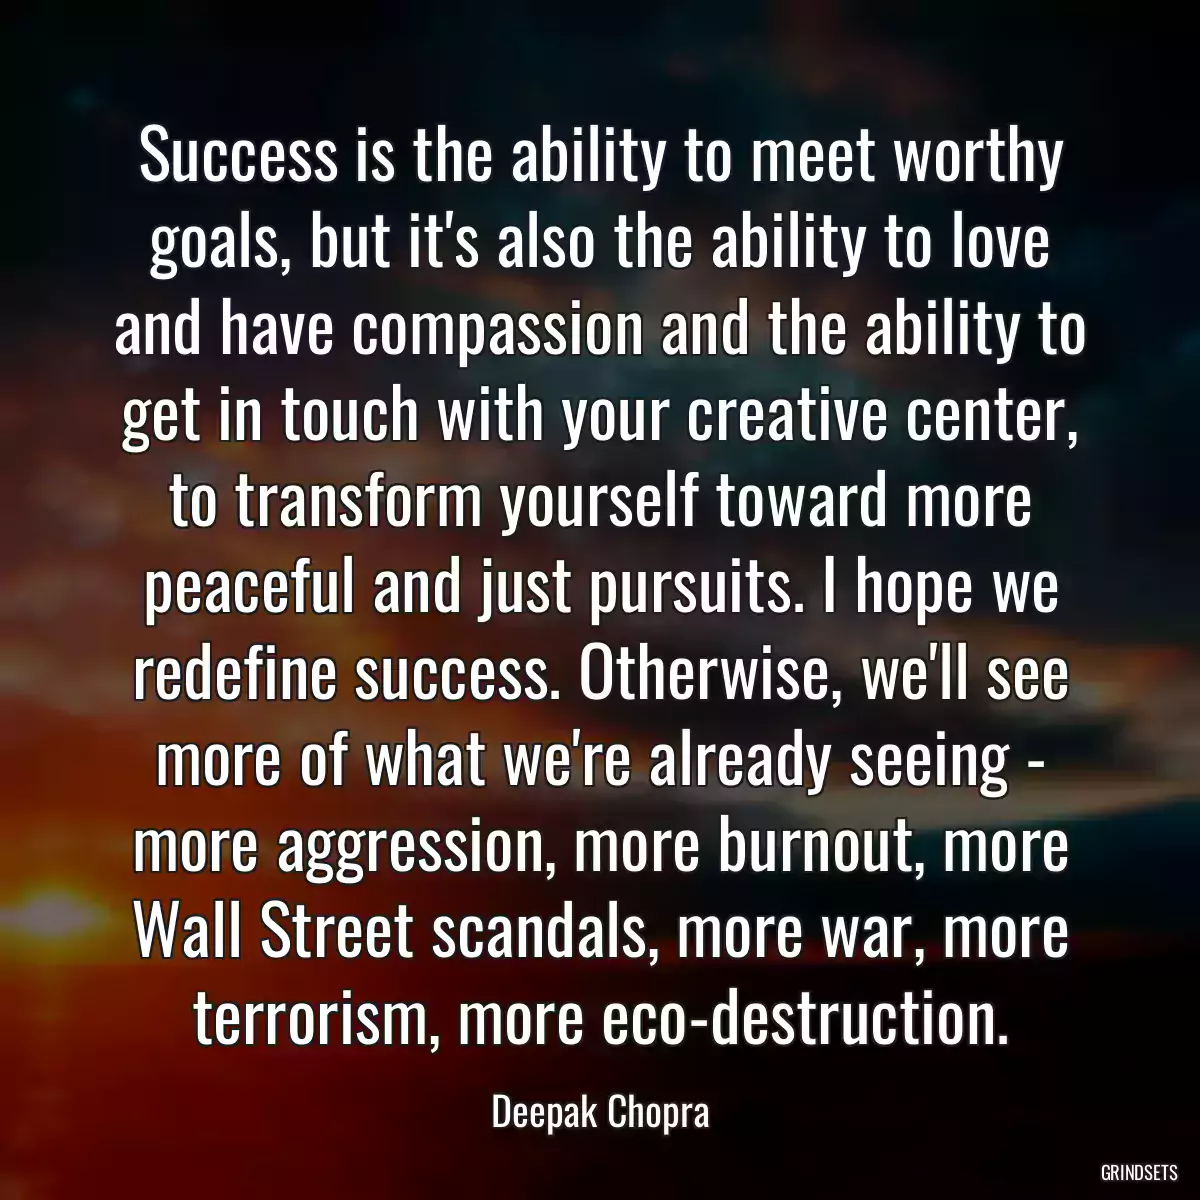 Success is the ability to meet worthy goals, but it\'s also the ability to love and have compassion and the ability to get in touch with your creative center, to transform yourself toward more peaceful and just pursuits. I hope we redefine success. Otherwise, we\'ll see more of what we\'re already seeing - more aggression, more burnout, more Wall Street scandals, more war, more terrorism, more eco-destruction.